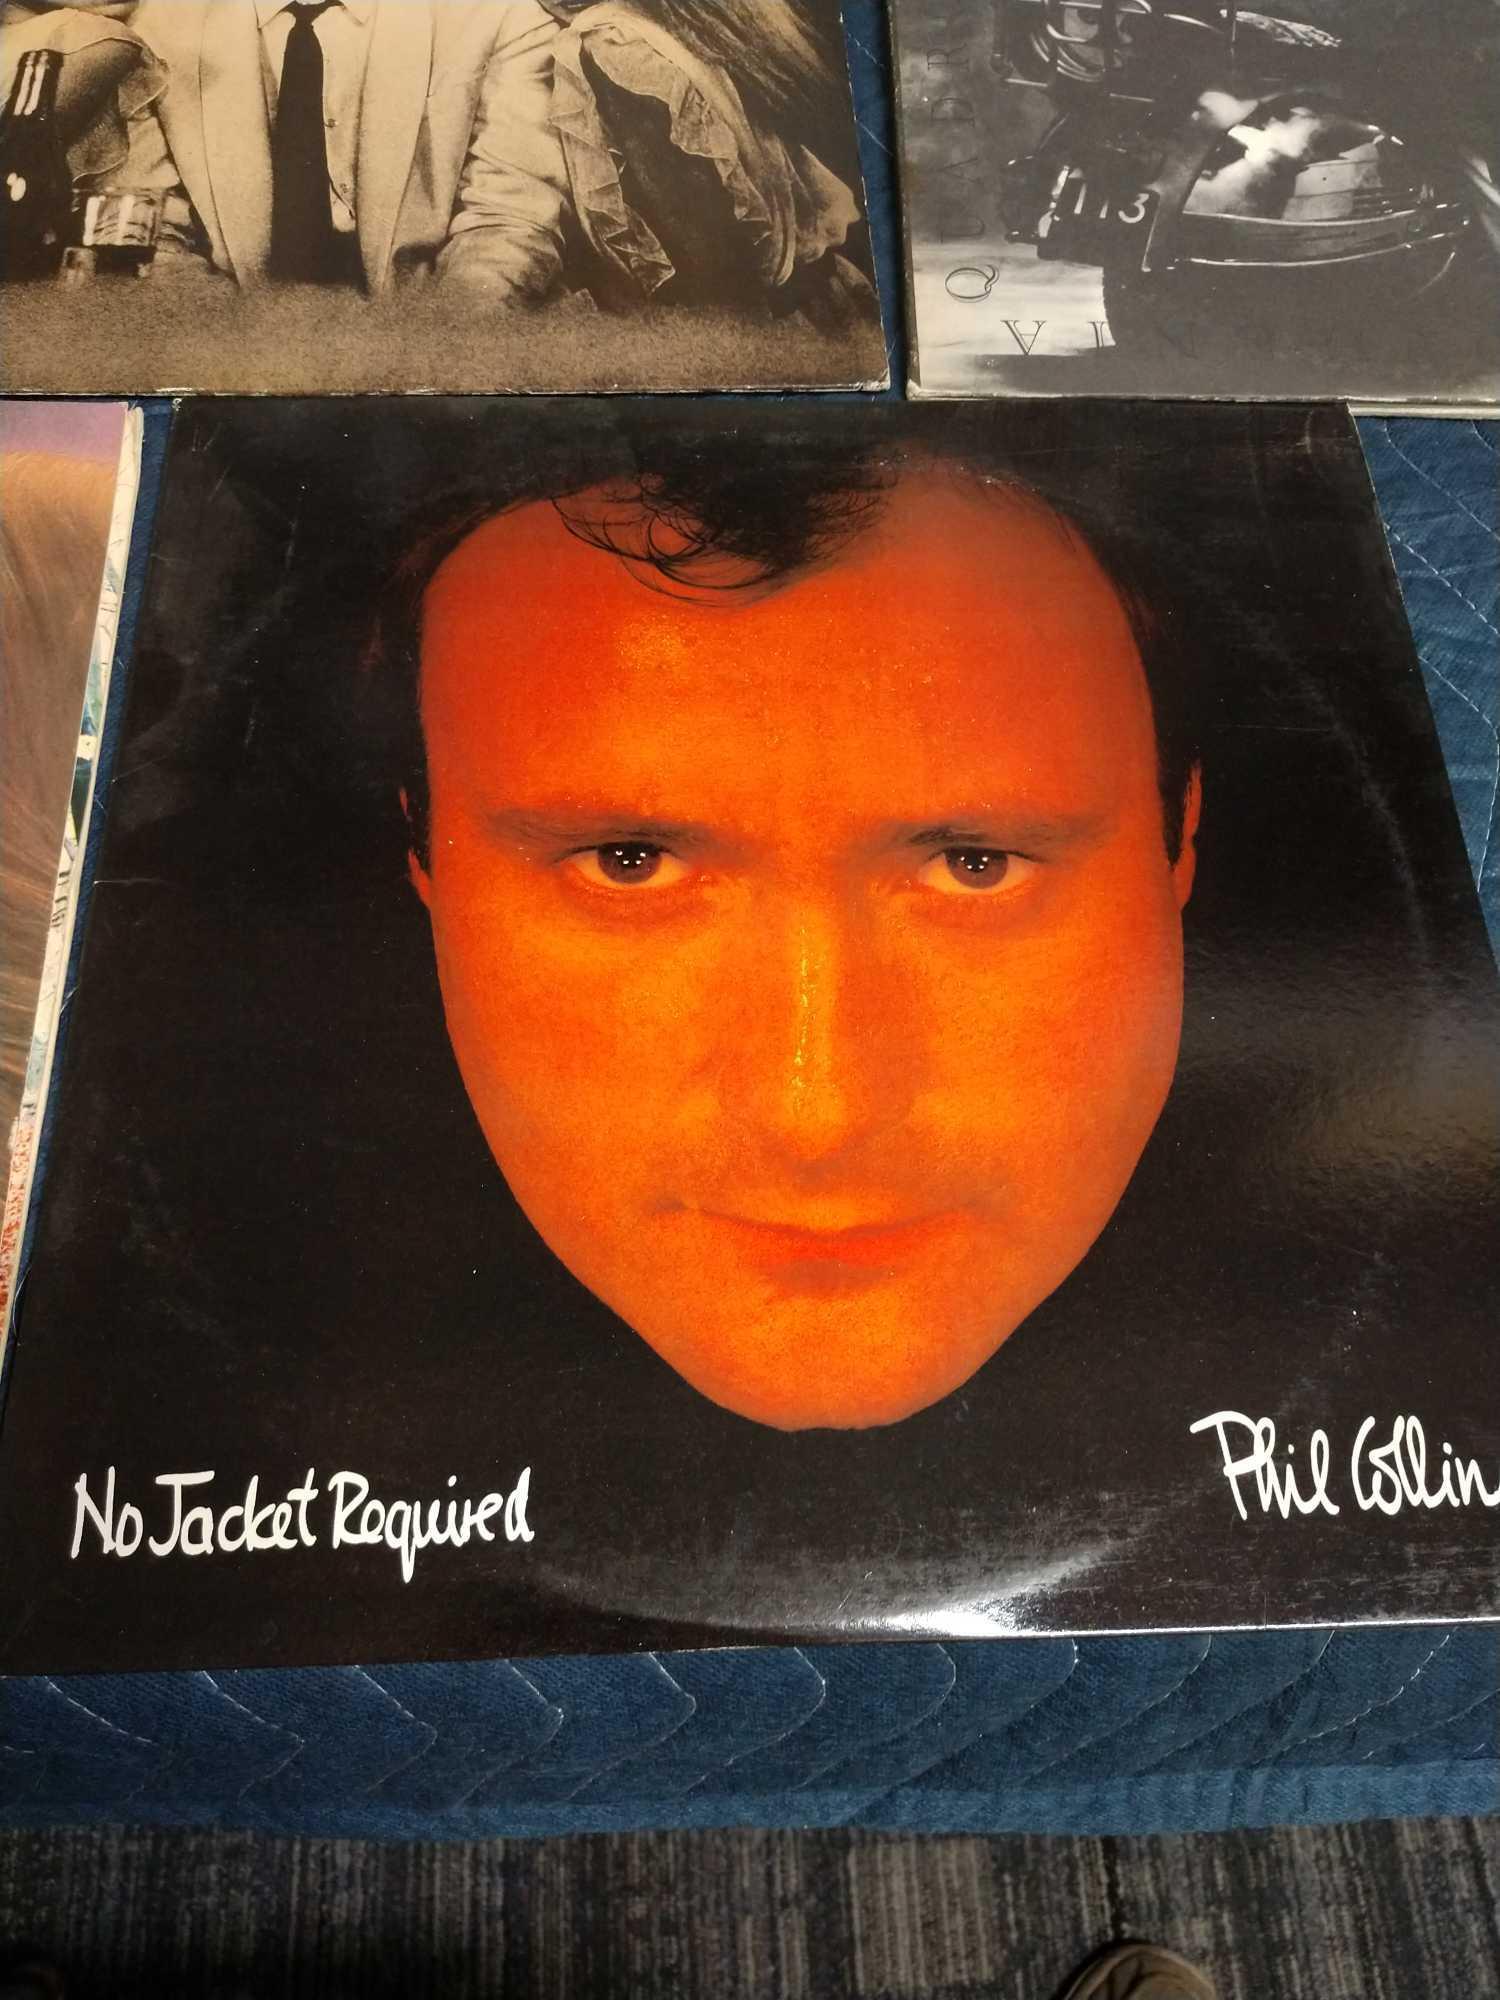 Five record albums including Phil Collins, Emerson Lake and Palmer, The who, and Pete Townsend